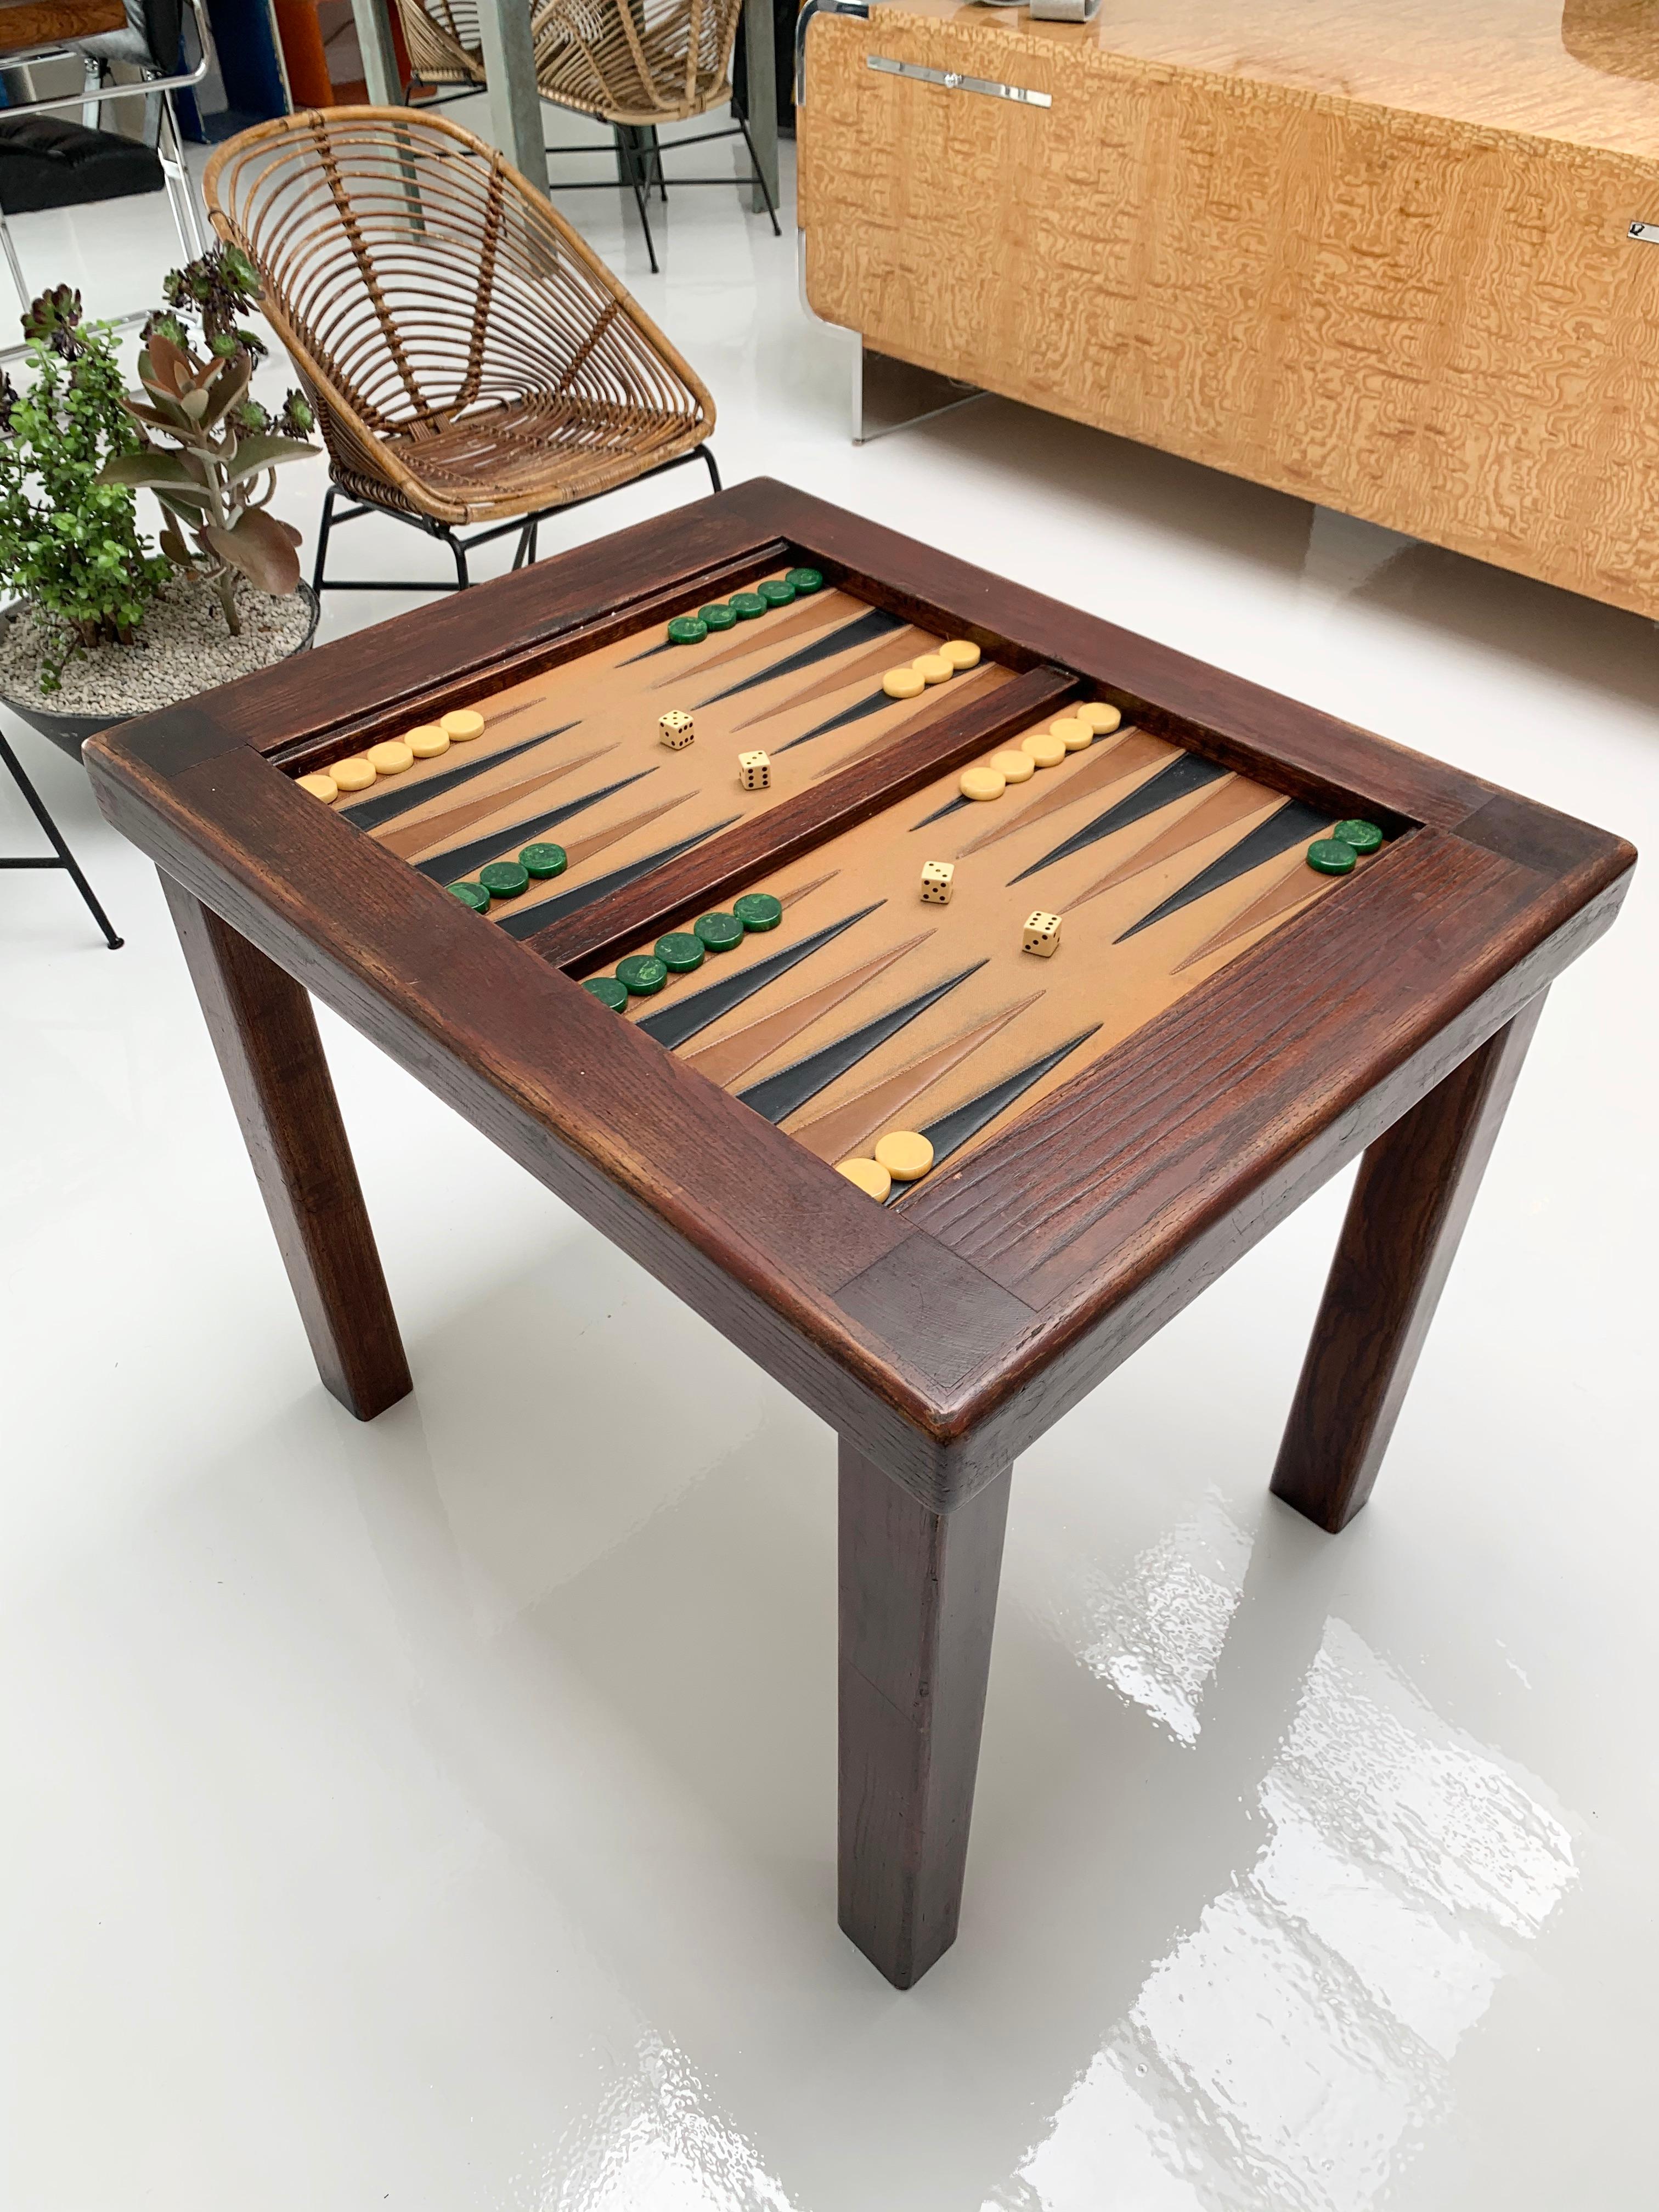 Classic wood backgammon table with removable glass top. Inside lays a felt backgammon board with leather triangles. Good vintage condition. Some light stains to felt. Set includes vintage Bakelite dice and vintage game pieces.